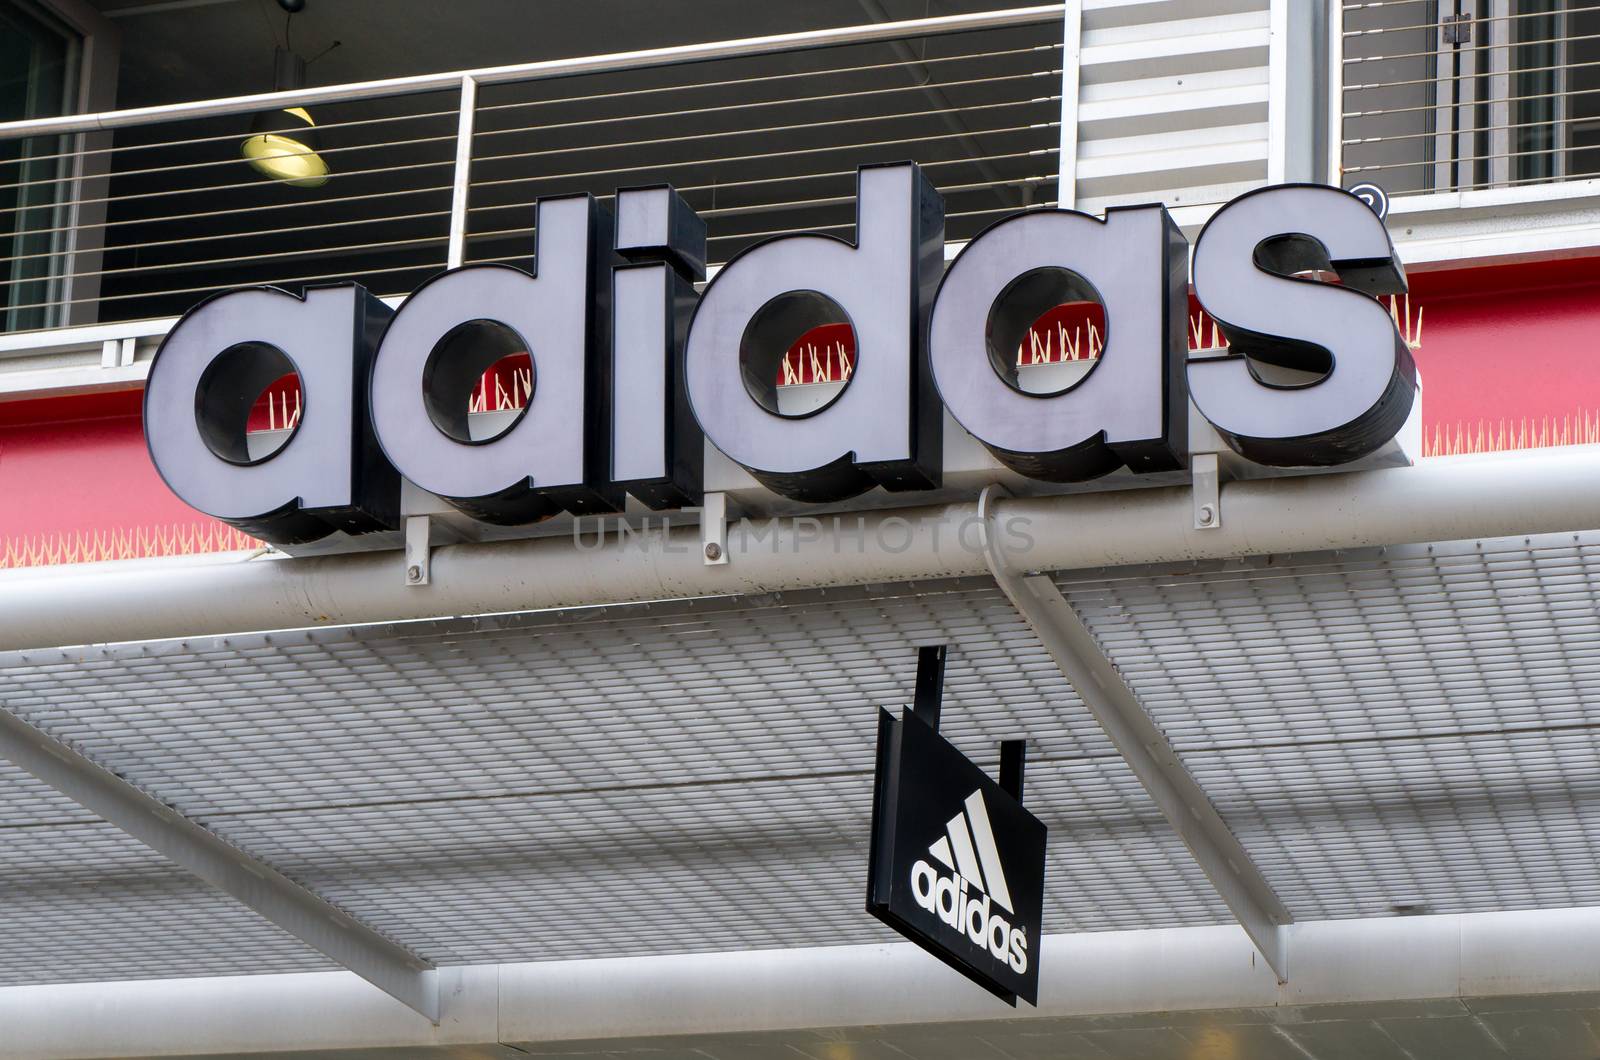 SANTA MONICA, CA/USA - MAY 12, 2016: Adidas retail store exterior and logo. Adidas is a German multinational corporation that designs and manufactures sports shoes, clothing and accessories.